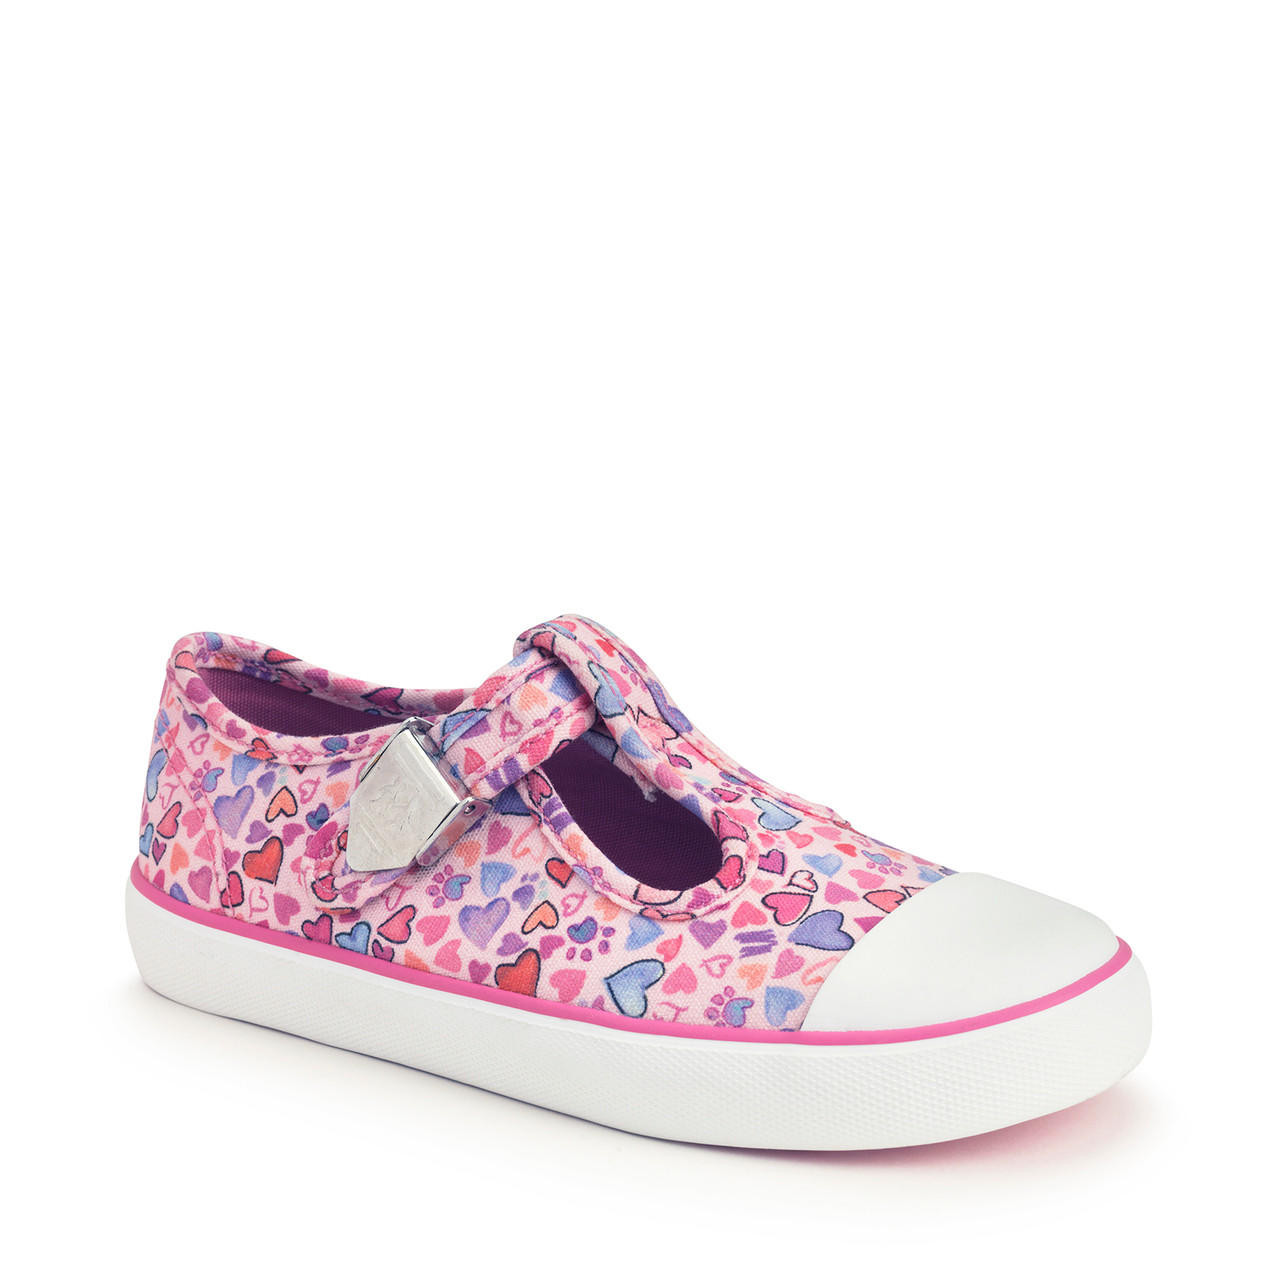 Sweets, Pink heart print girls t-bar buckle canvas